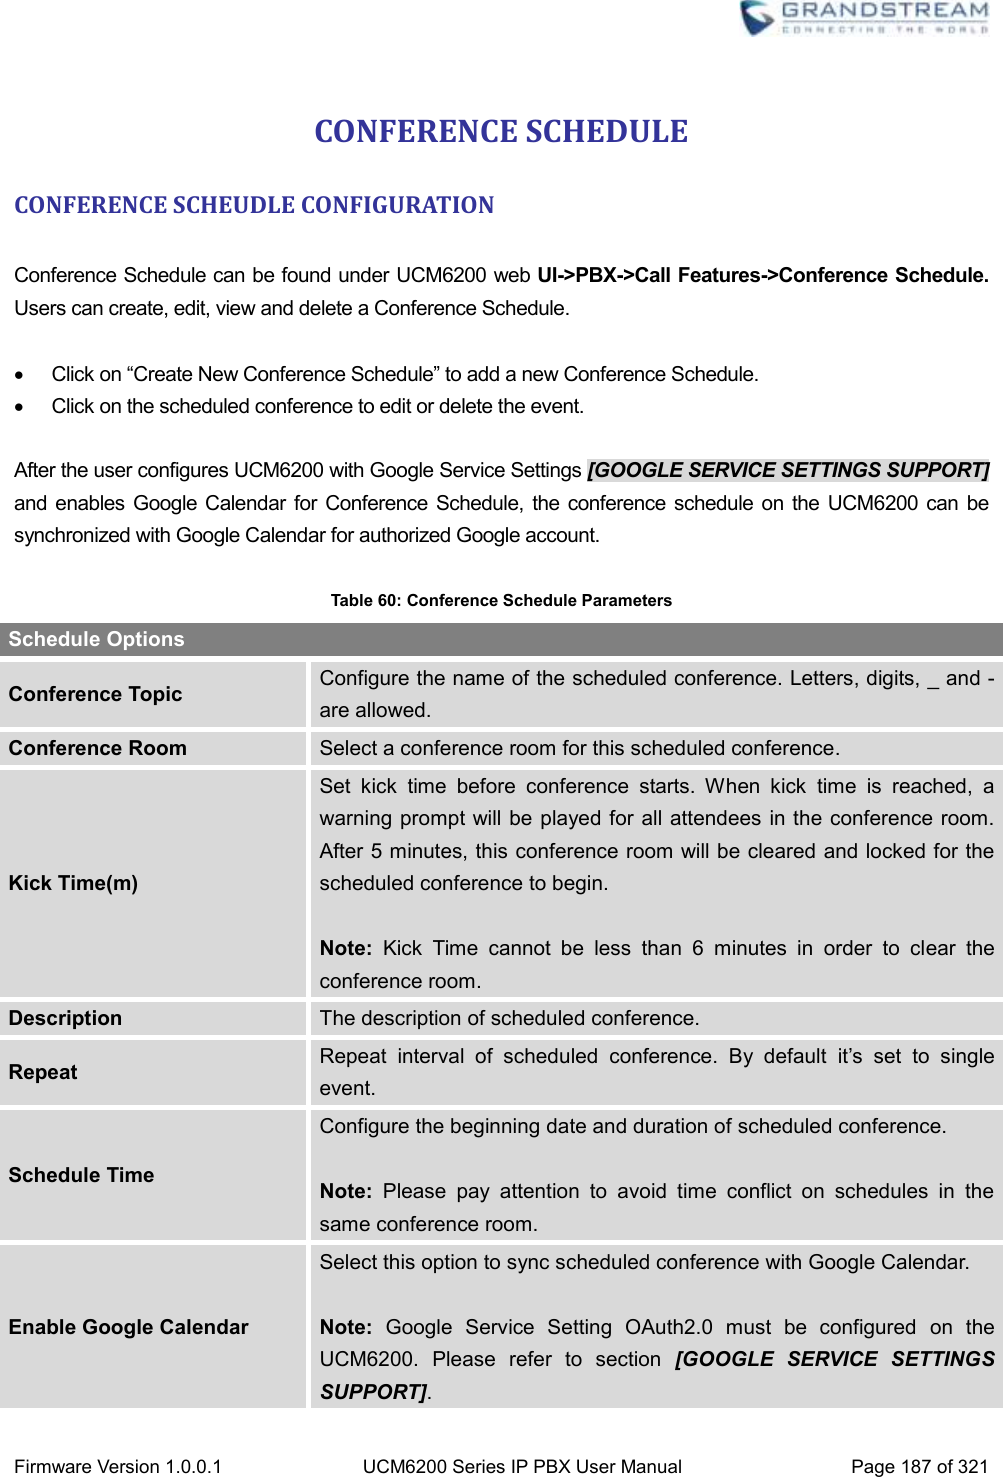  Firmware Version 1.0.0.1 UCM6200 Series IP PBX User Manual Page 187 of 321    CONFERENCE SCHEDULE CONFERENCE SCHEUDLE CONFIGURATION  Conference Schedule can be found under UCM6200 web UI-&gt;PBX-&gt;Call Features-&gt;Conference Schedule. Users can create, edit, view and delete a Conference Schedule.      Click on “Create New Conference Schedule” to add a new Conference Schedule.   Click on the scheduled conference to edit or delete the event.  After the user configures UCM6200 with Google Service Settings [GOOGLE SERVICE SETTINGS SUPPORT] and enables Google Calendar for Conference Schedule, the conference schedule on the UCM6200 can be synchronized with Google Calendar for authorized Google account.    Table 60: Conference Schedule Parameters Schedule Options Conference Topic Configure the name of the scheduled conference. Letters, digits, _ and - are allowed. Conference Room Select a conference room for this scheduled conference. Kick Time(m) Set  kick  time  before  conference  starts.  When  kick  time  is  reached,  a warning prompt will be played for all attendees  in the conference room. After 5 minutes, this conference room will be cleared and locked for the scheduled conference to begin.  Note:  Kick  Time  cannot  be  less  than  6  minutes  in  order  to  clear  the conference room.   Description The description of scheduled conference. Repeat Repeat  interval  of  scheduled  conference.  By  default  it’s  set  to  single event. Schedule Time Configure the beginning date and duration of scheduled conference.    Note:  Please  pay  attention  to  avoid  time  conflict  on  schedules  in  the same conference room.   Enable Google Calendar Select this option to sync scheduled conference with Google Calendar.    Note:  Google  Service  Setting  OAuth2.0  must  be  configured  on  the UCM6200.  Please  refer  to  section  [GOOGLE  SERVICE  SETTINGS SUPPORT].   